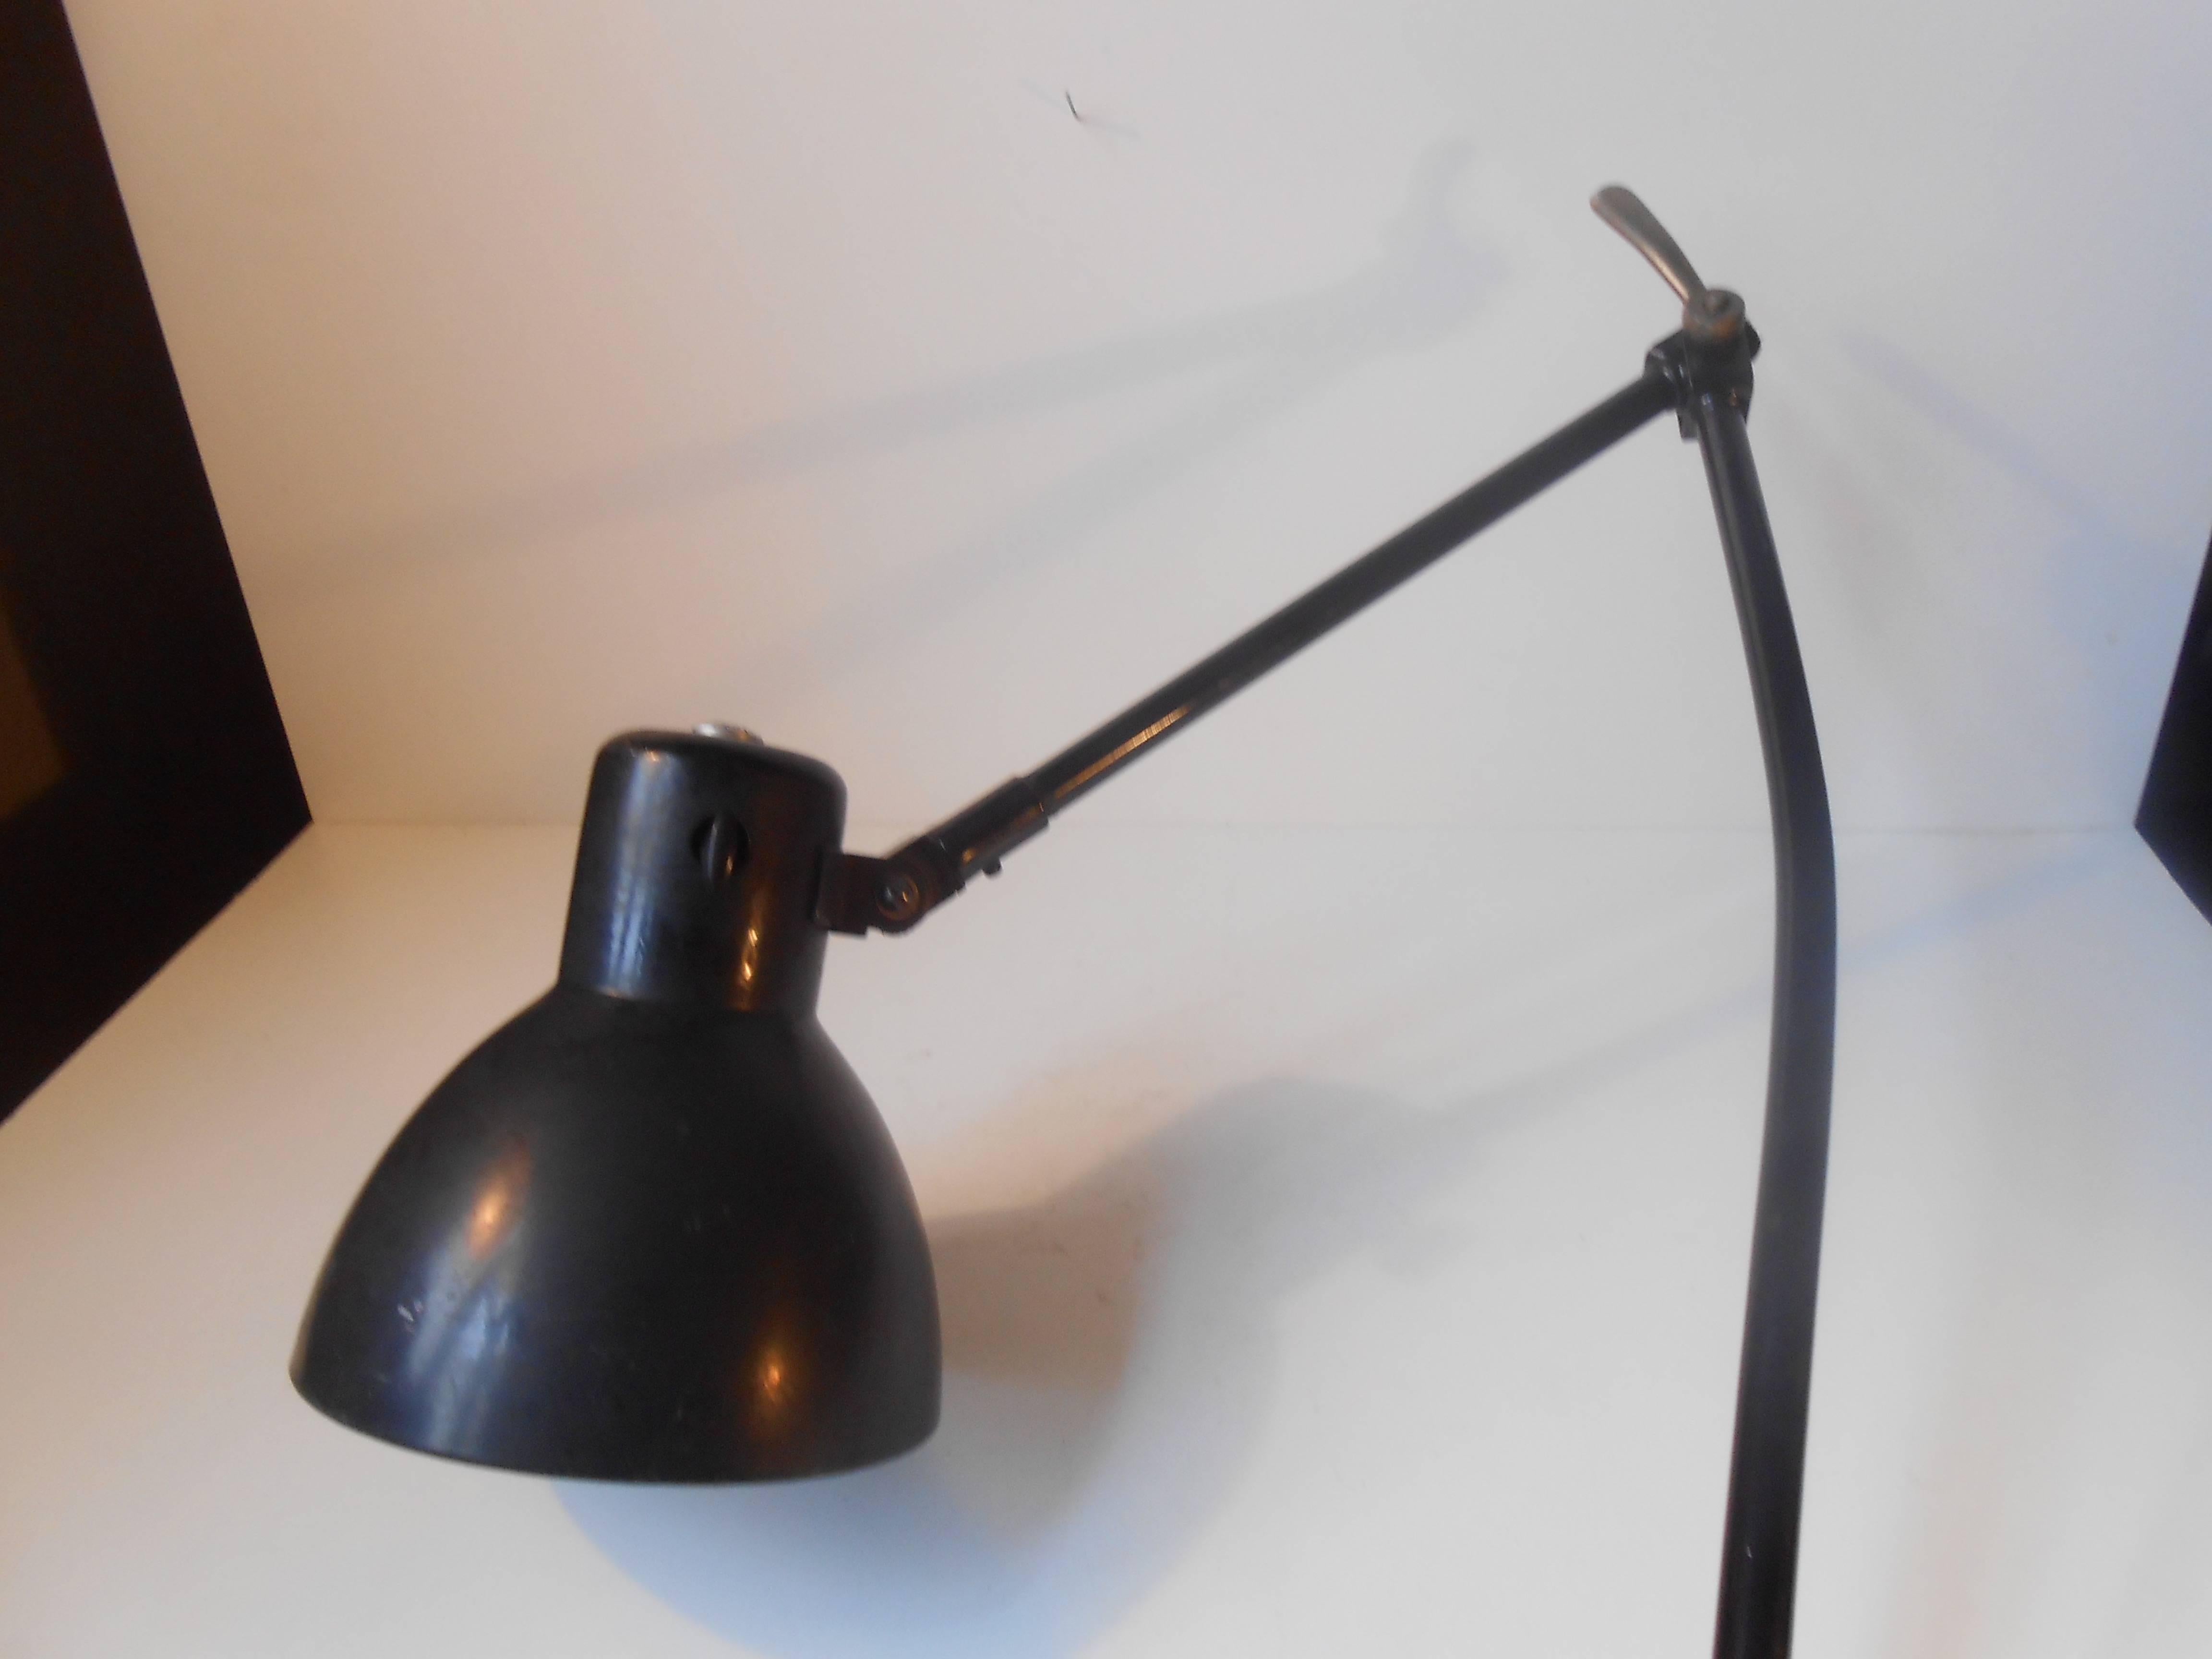 Industrial architect desk or wall light designed by Bauhaus Icon Marianne Brandt. It was manufactured by German Kandem in the 1930s. The adjustable arms is made from black enameled steel and the shade dfrom enameled aluminium. It has a large